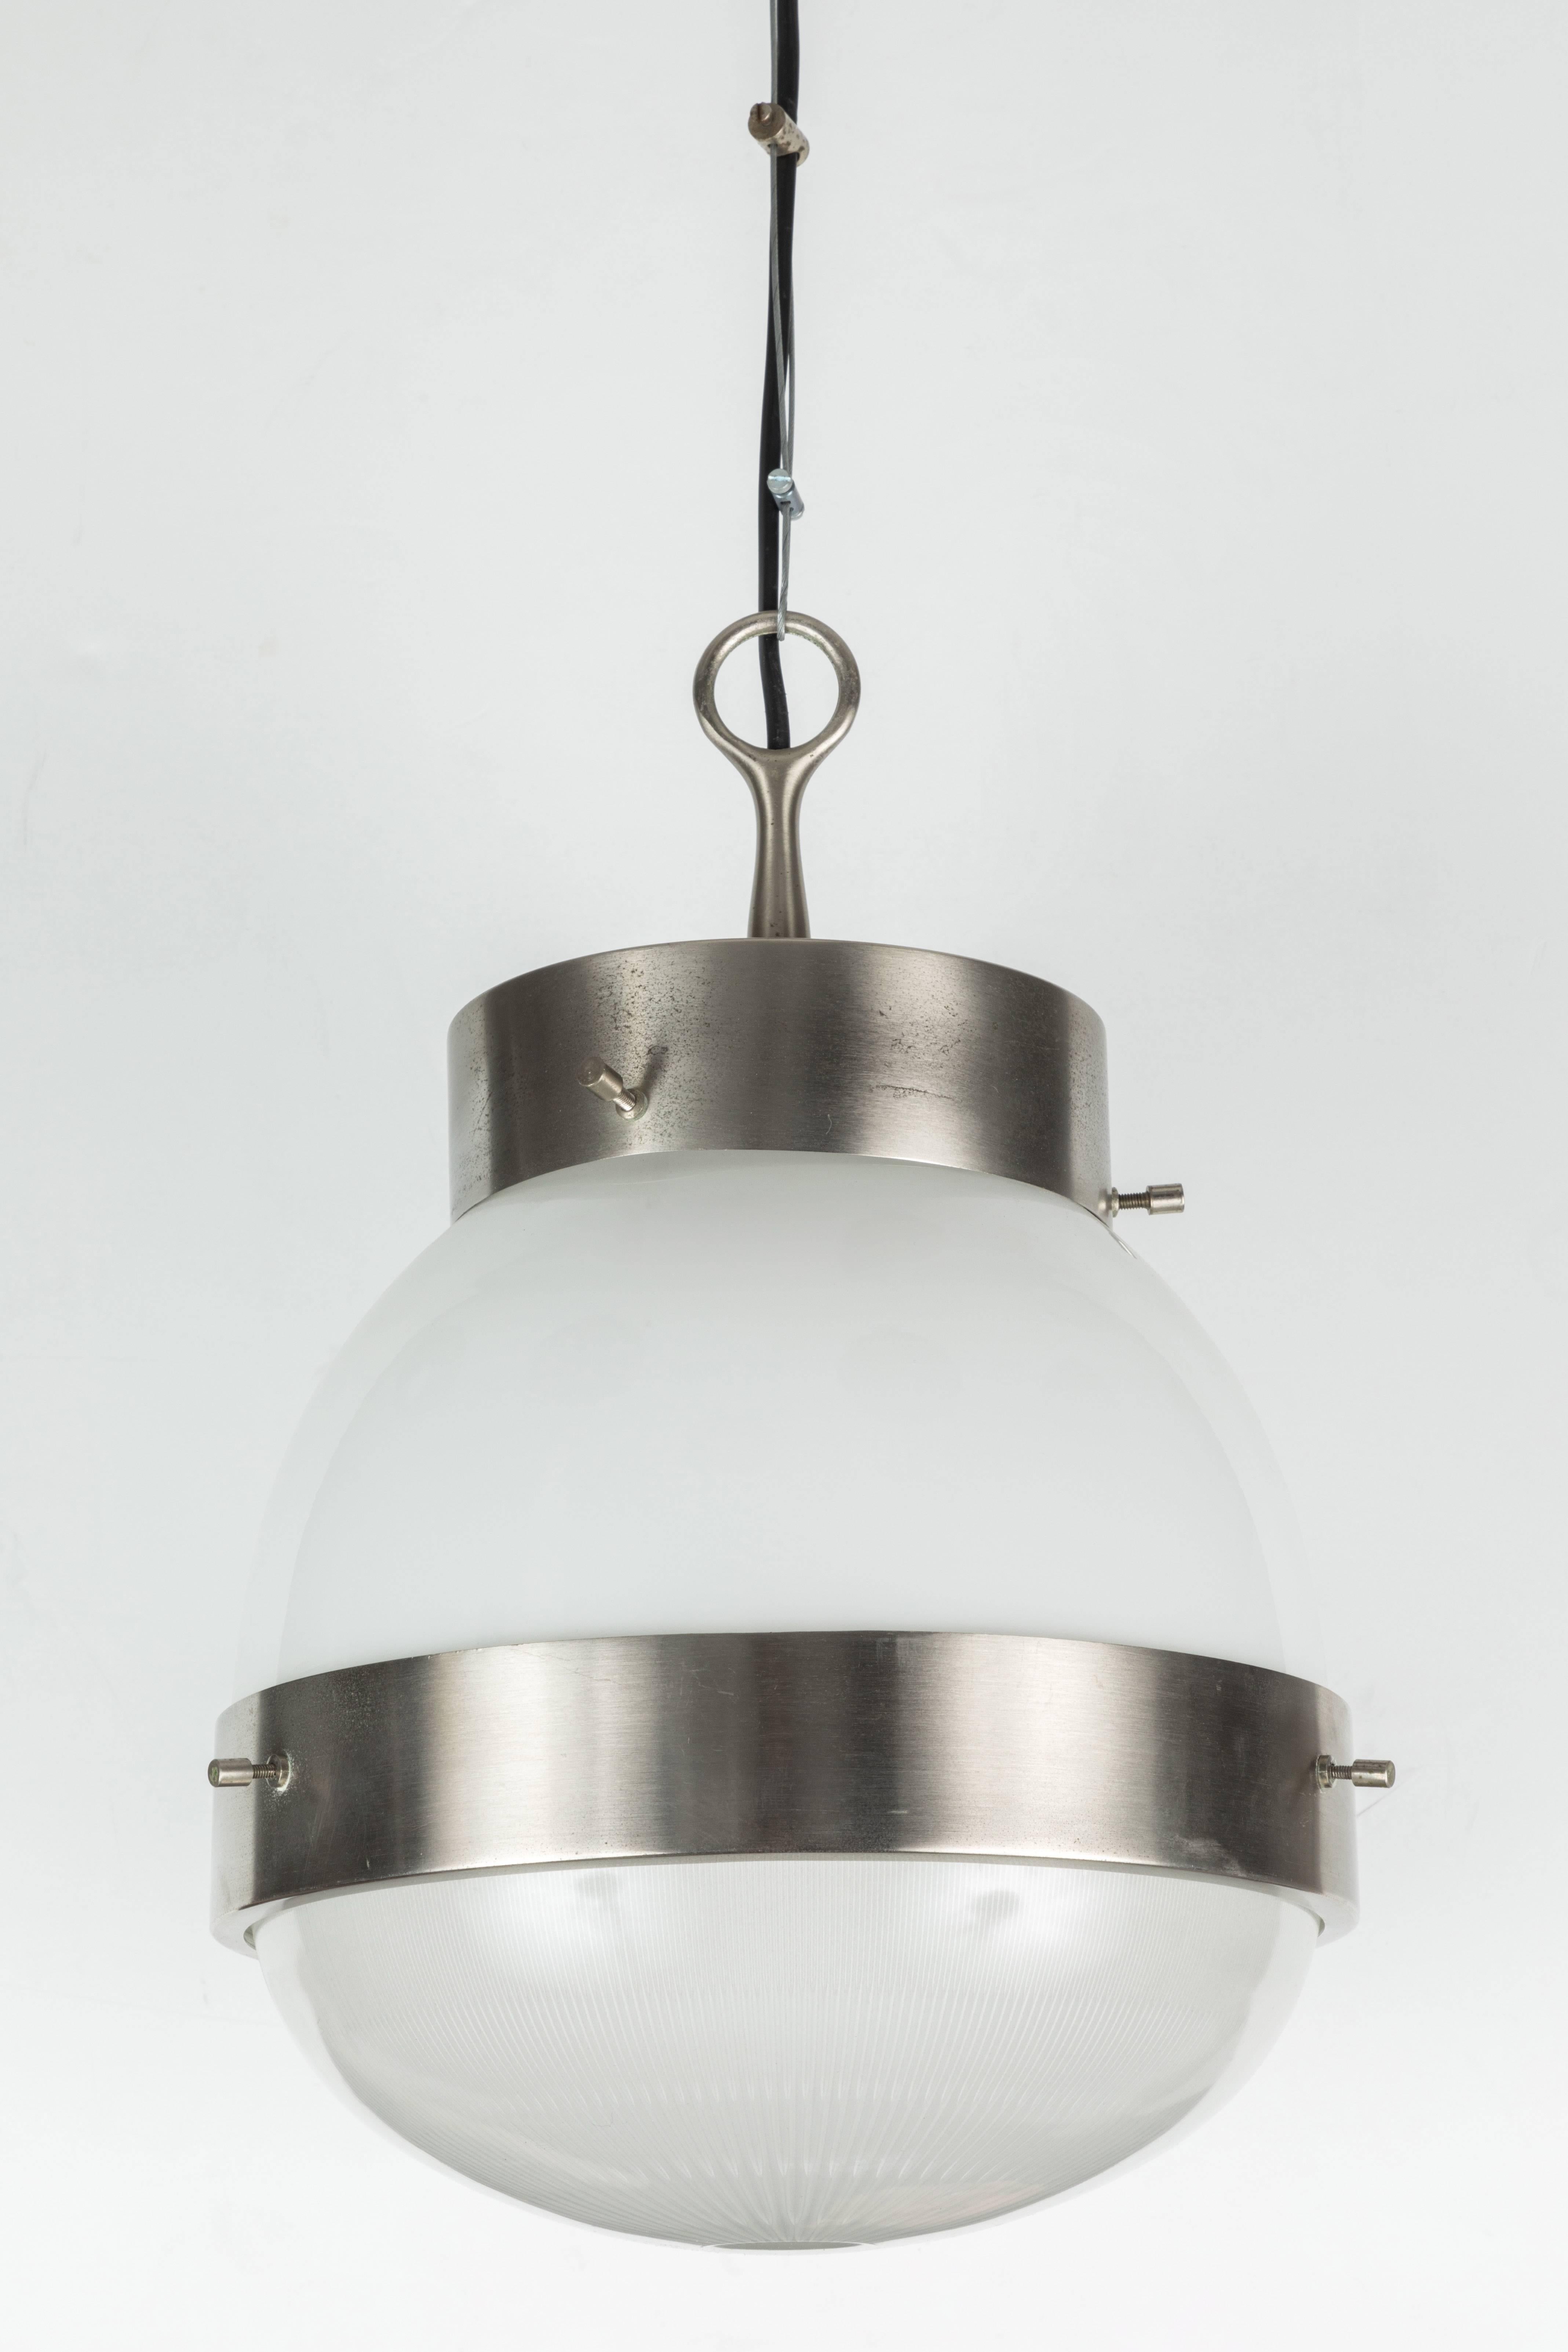 1960s Sergio Mazza 'Delta' pendant for Artemide. An architectural signature design by the incomparable Italian icon of Modernism. Executed in nickelled brass, opaline and pressed glass.

Also available in an all brass option in a separate